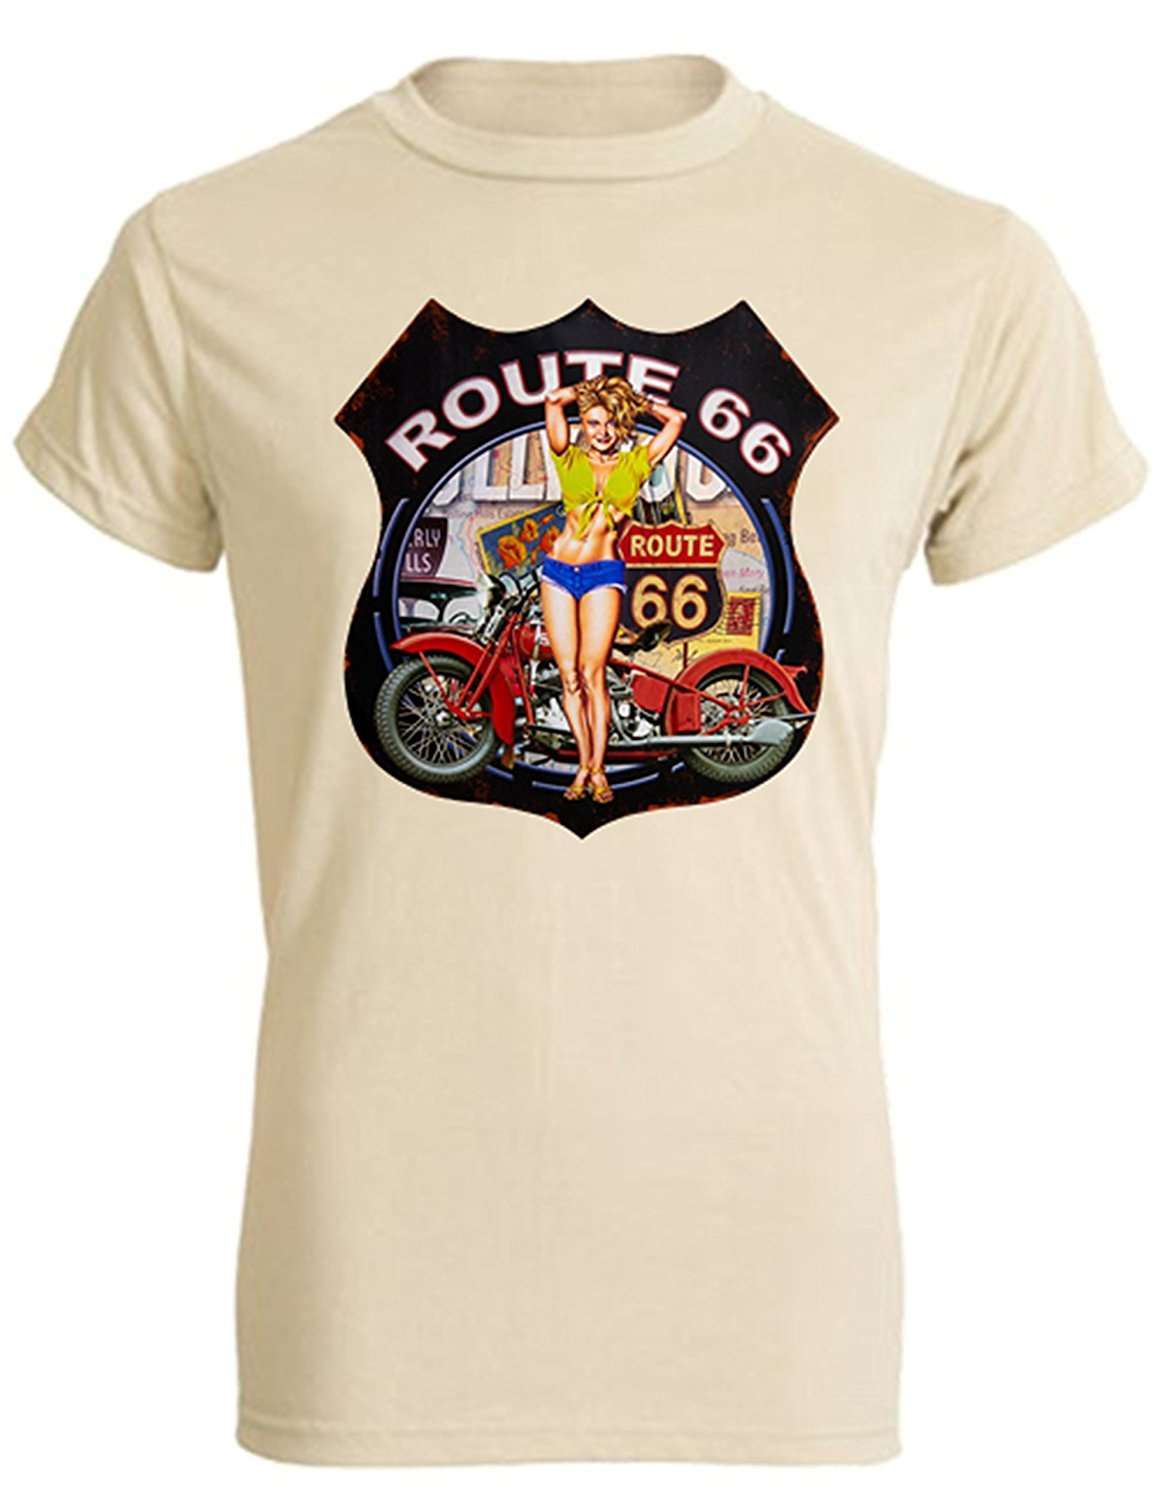 Army 1157 Kit Route 66 Tshirt - Army 1157 kit X-Large / Sand Army 1157 Kit Veterans Owned Business